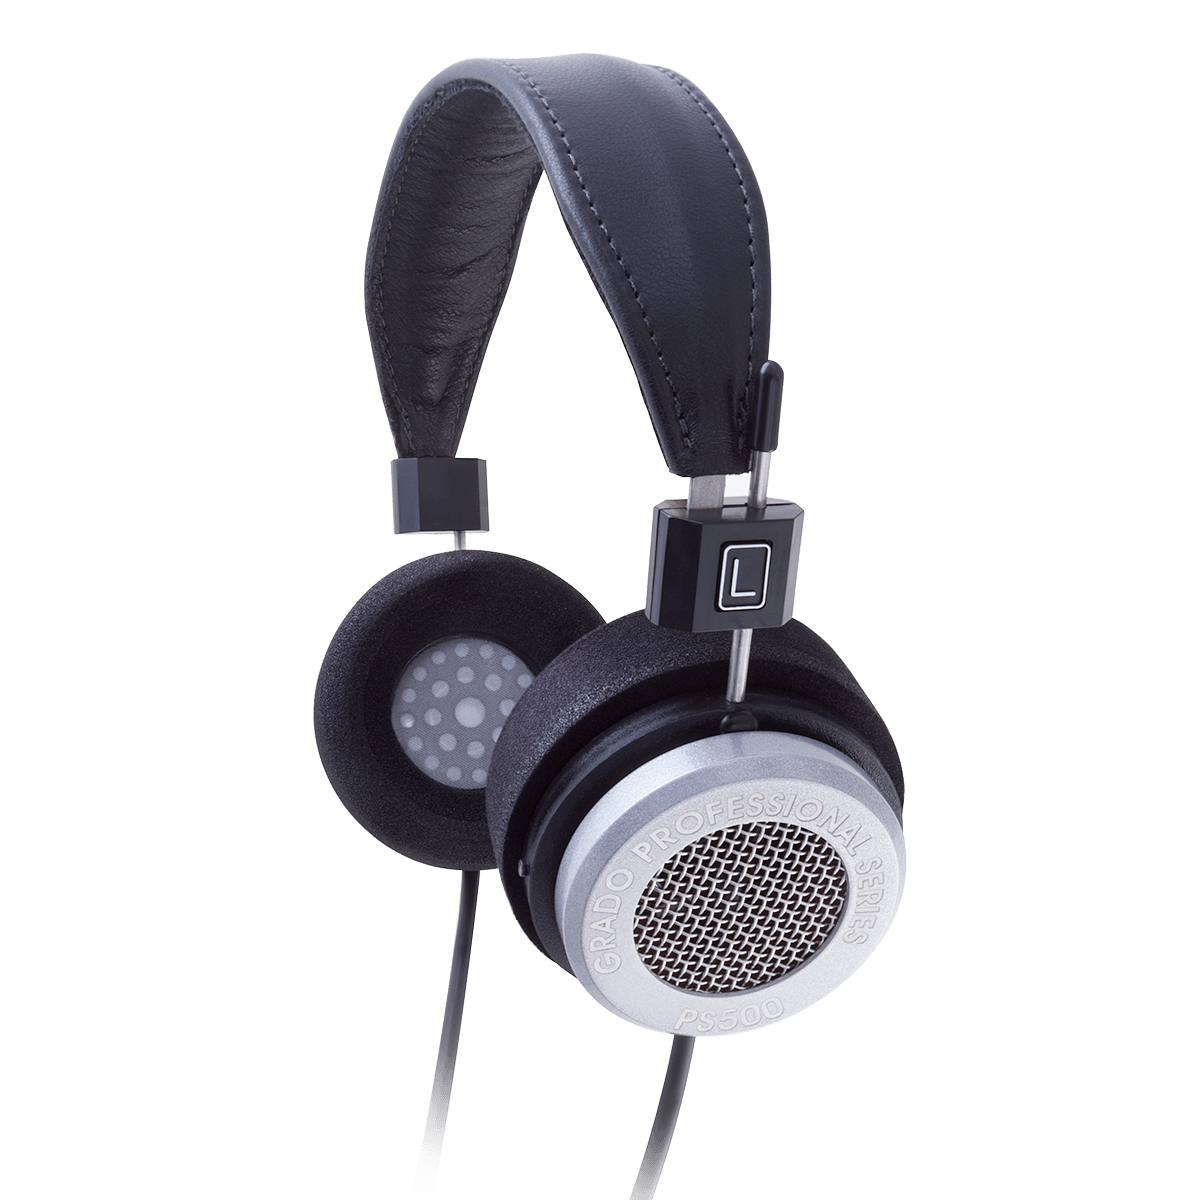 3/4 view photo of PS500e headphones on a white background